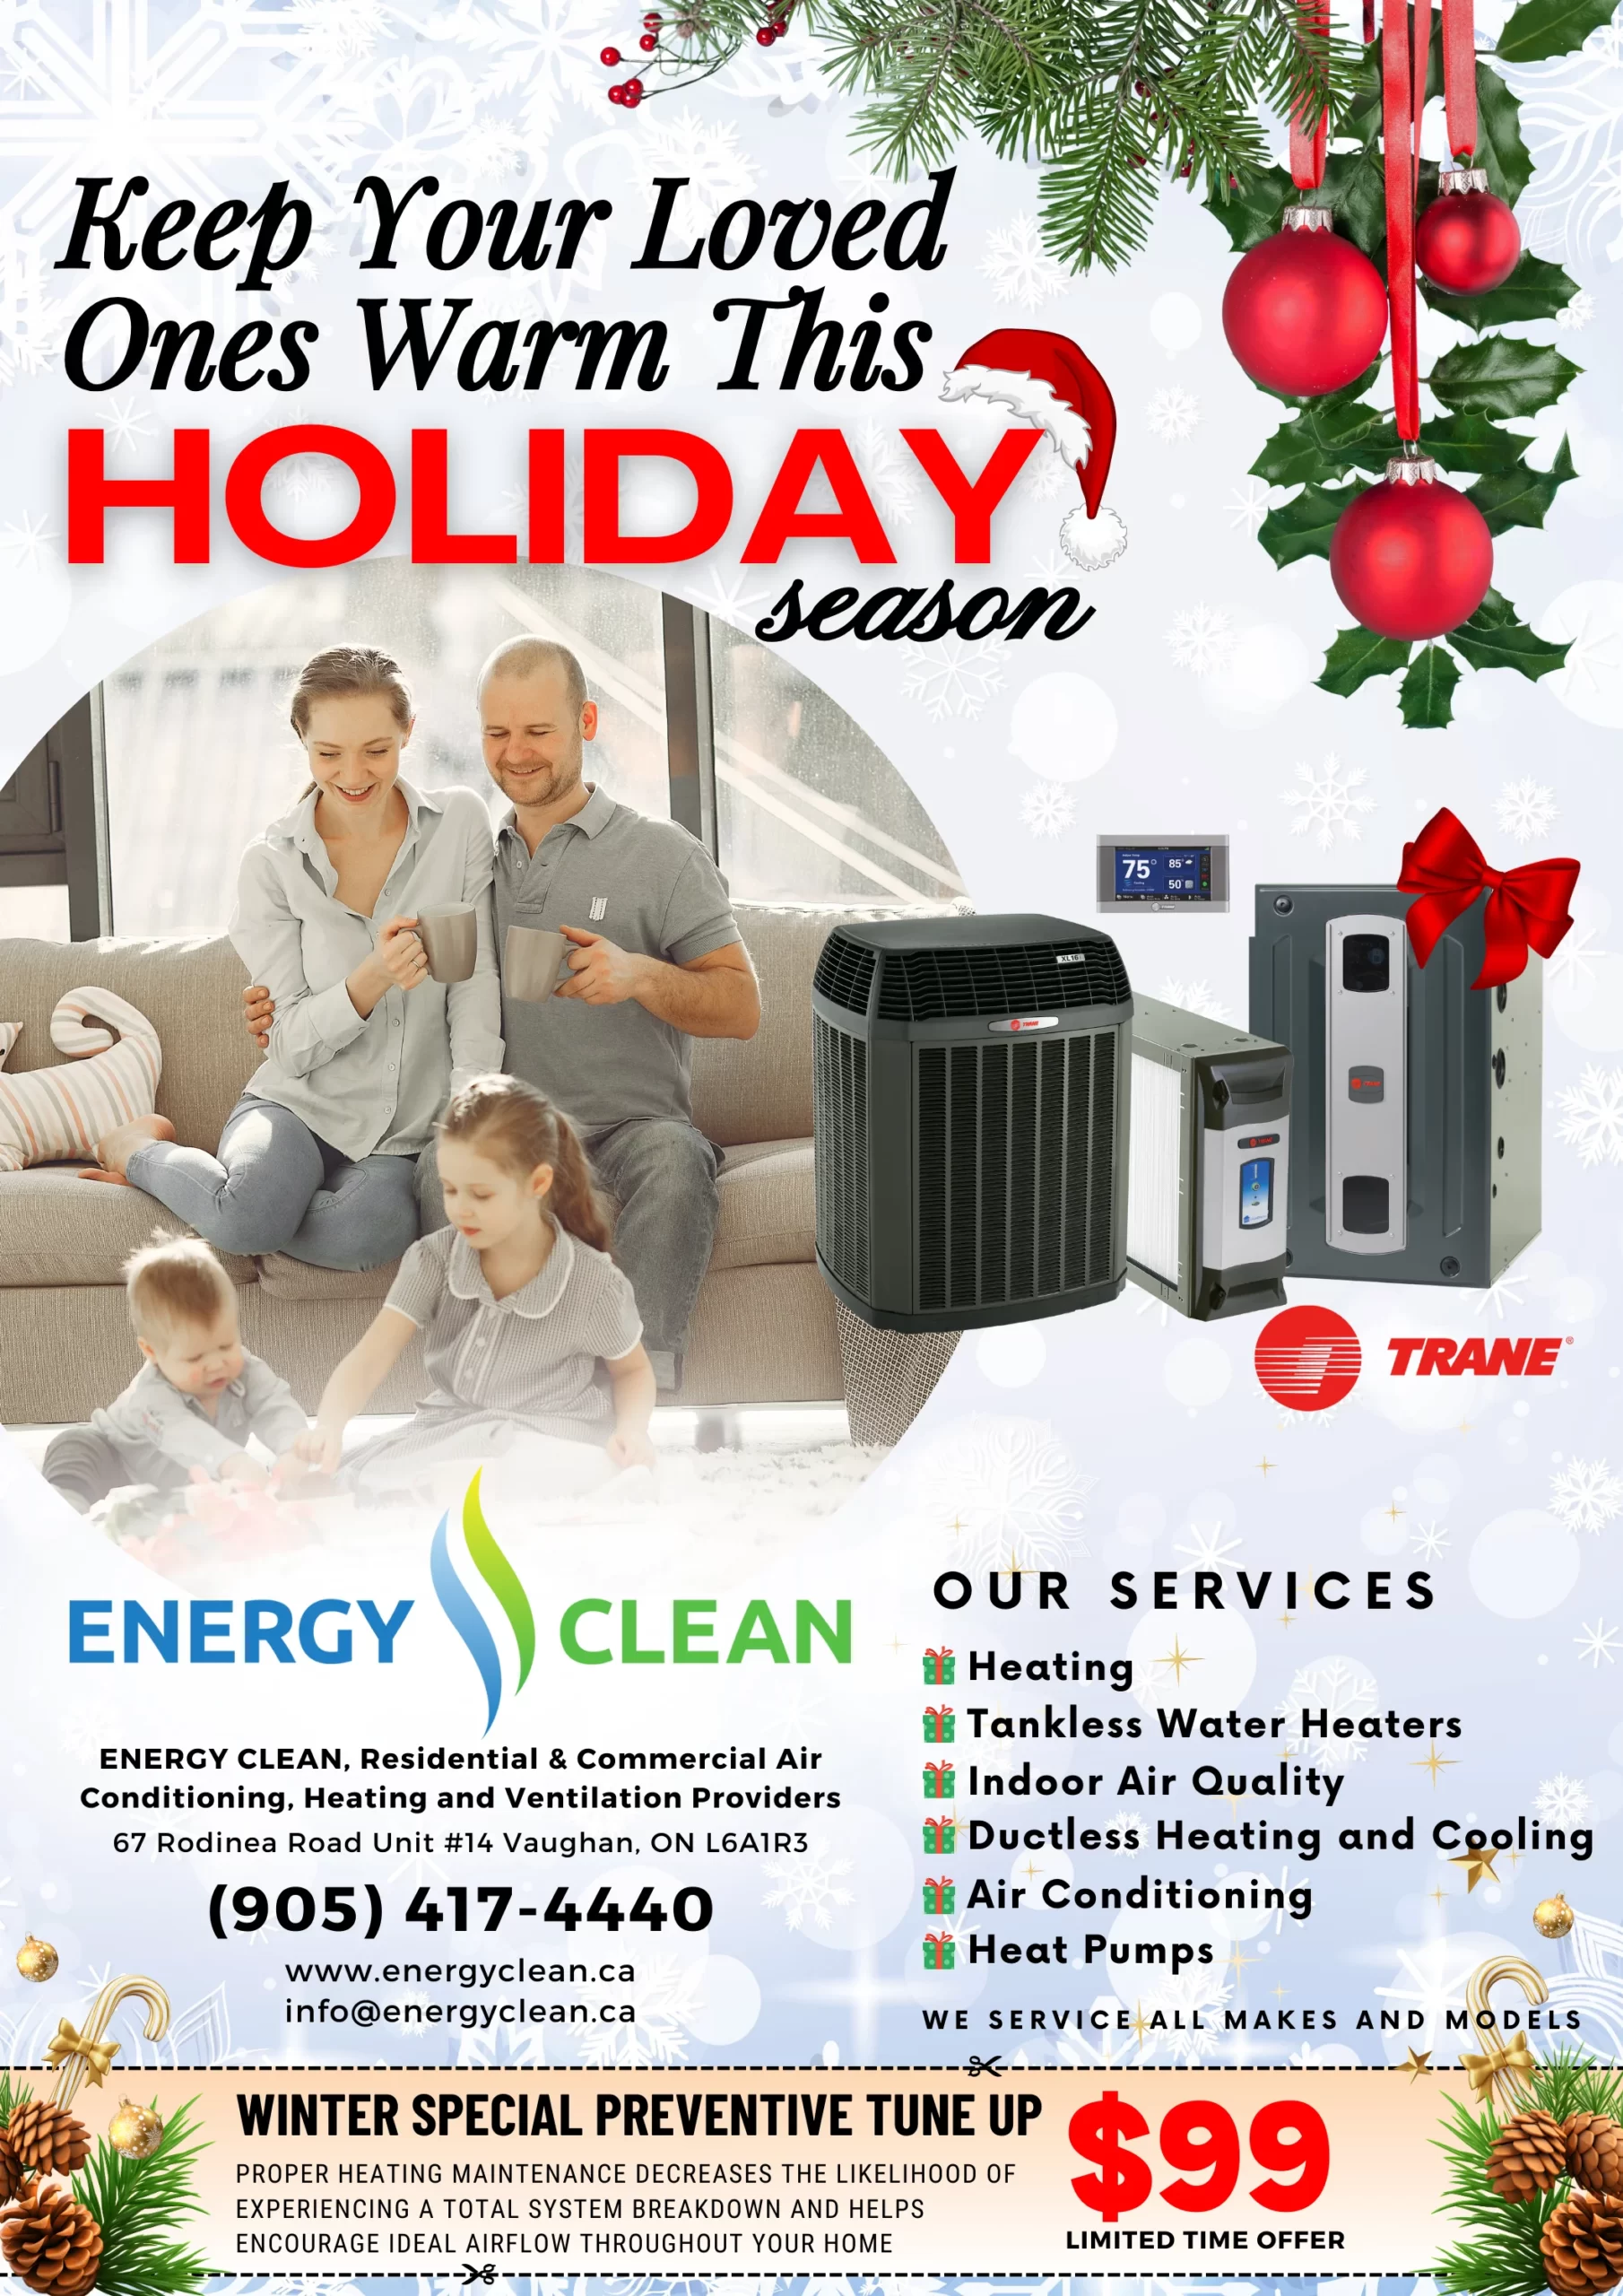 Energy clean Family - Optimized File SiZe